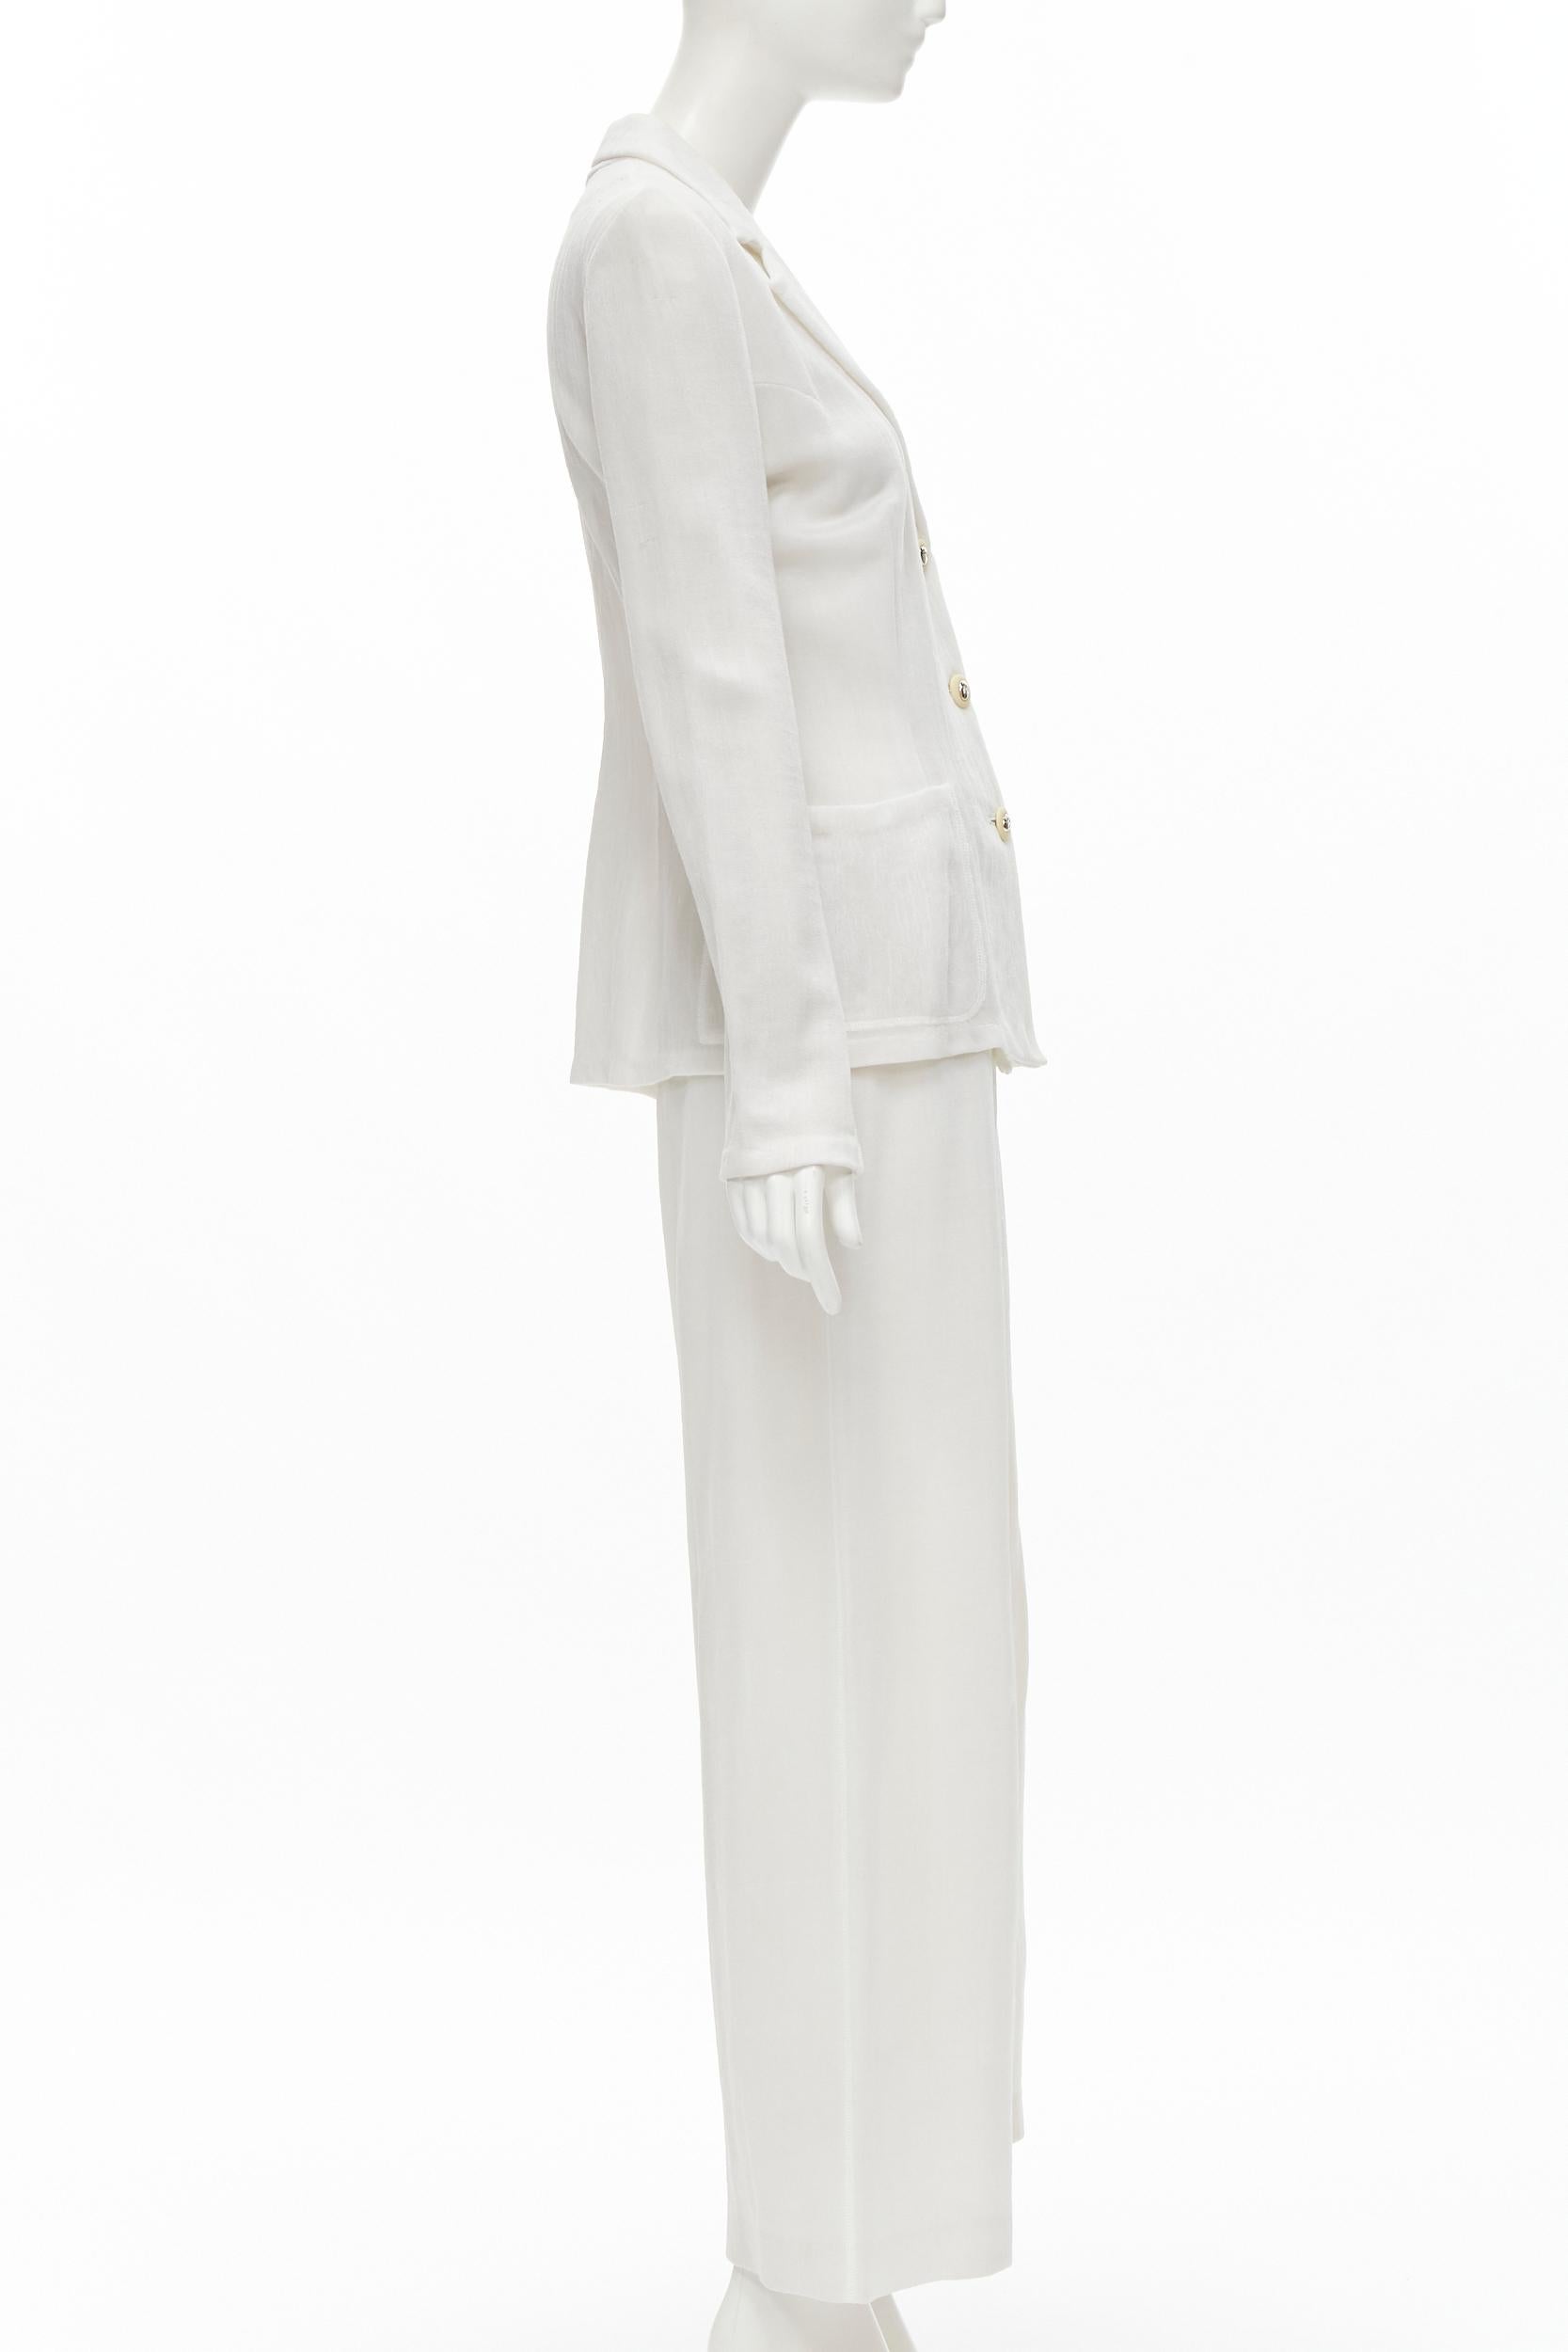 MARIOT CHANET white textured logo button fitted blazer wide leg pants IT42 M In Good Condition For Sale In Hong Kong, NT